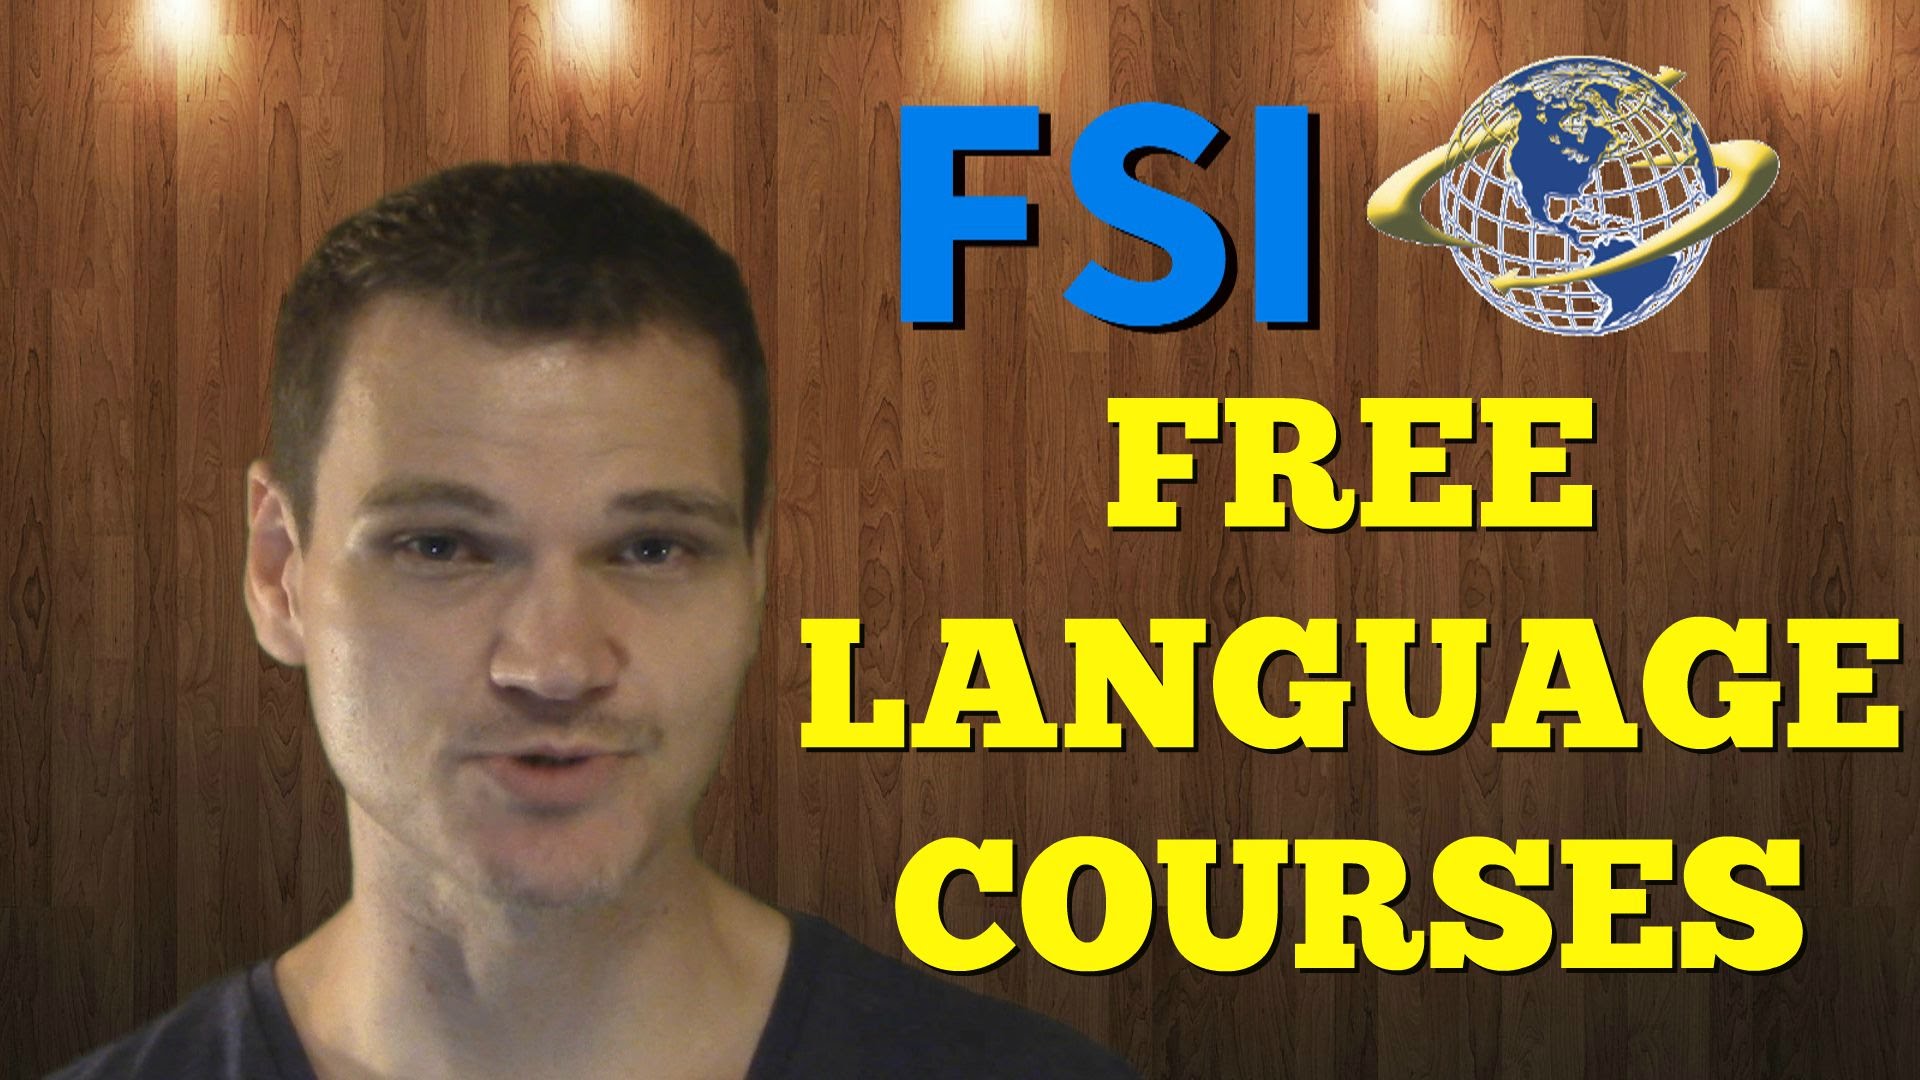 Free FSI Language Courses – Are They Good?